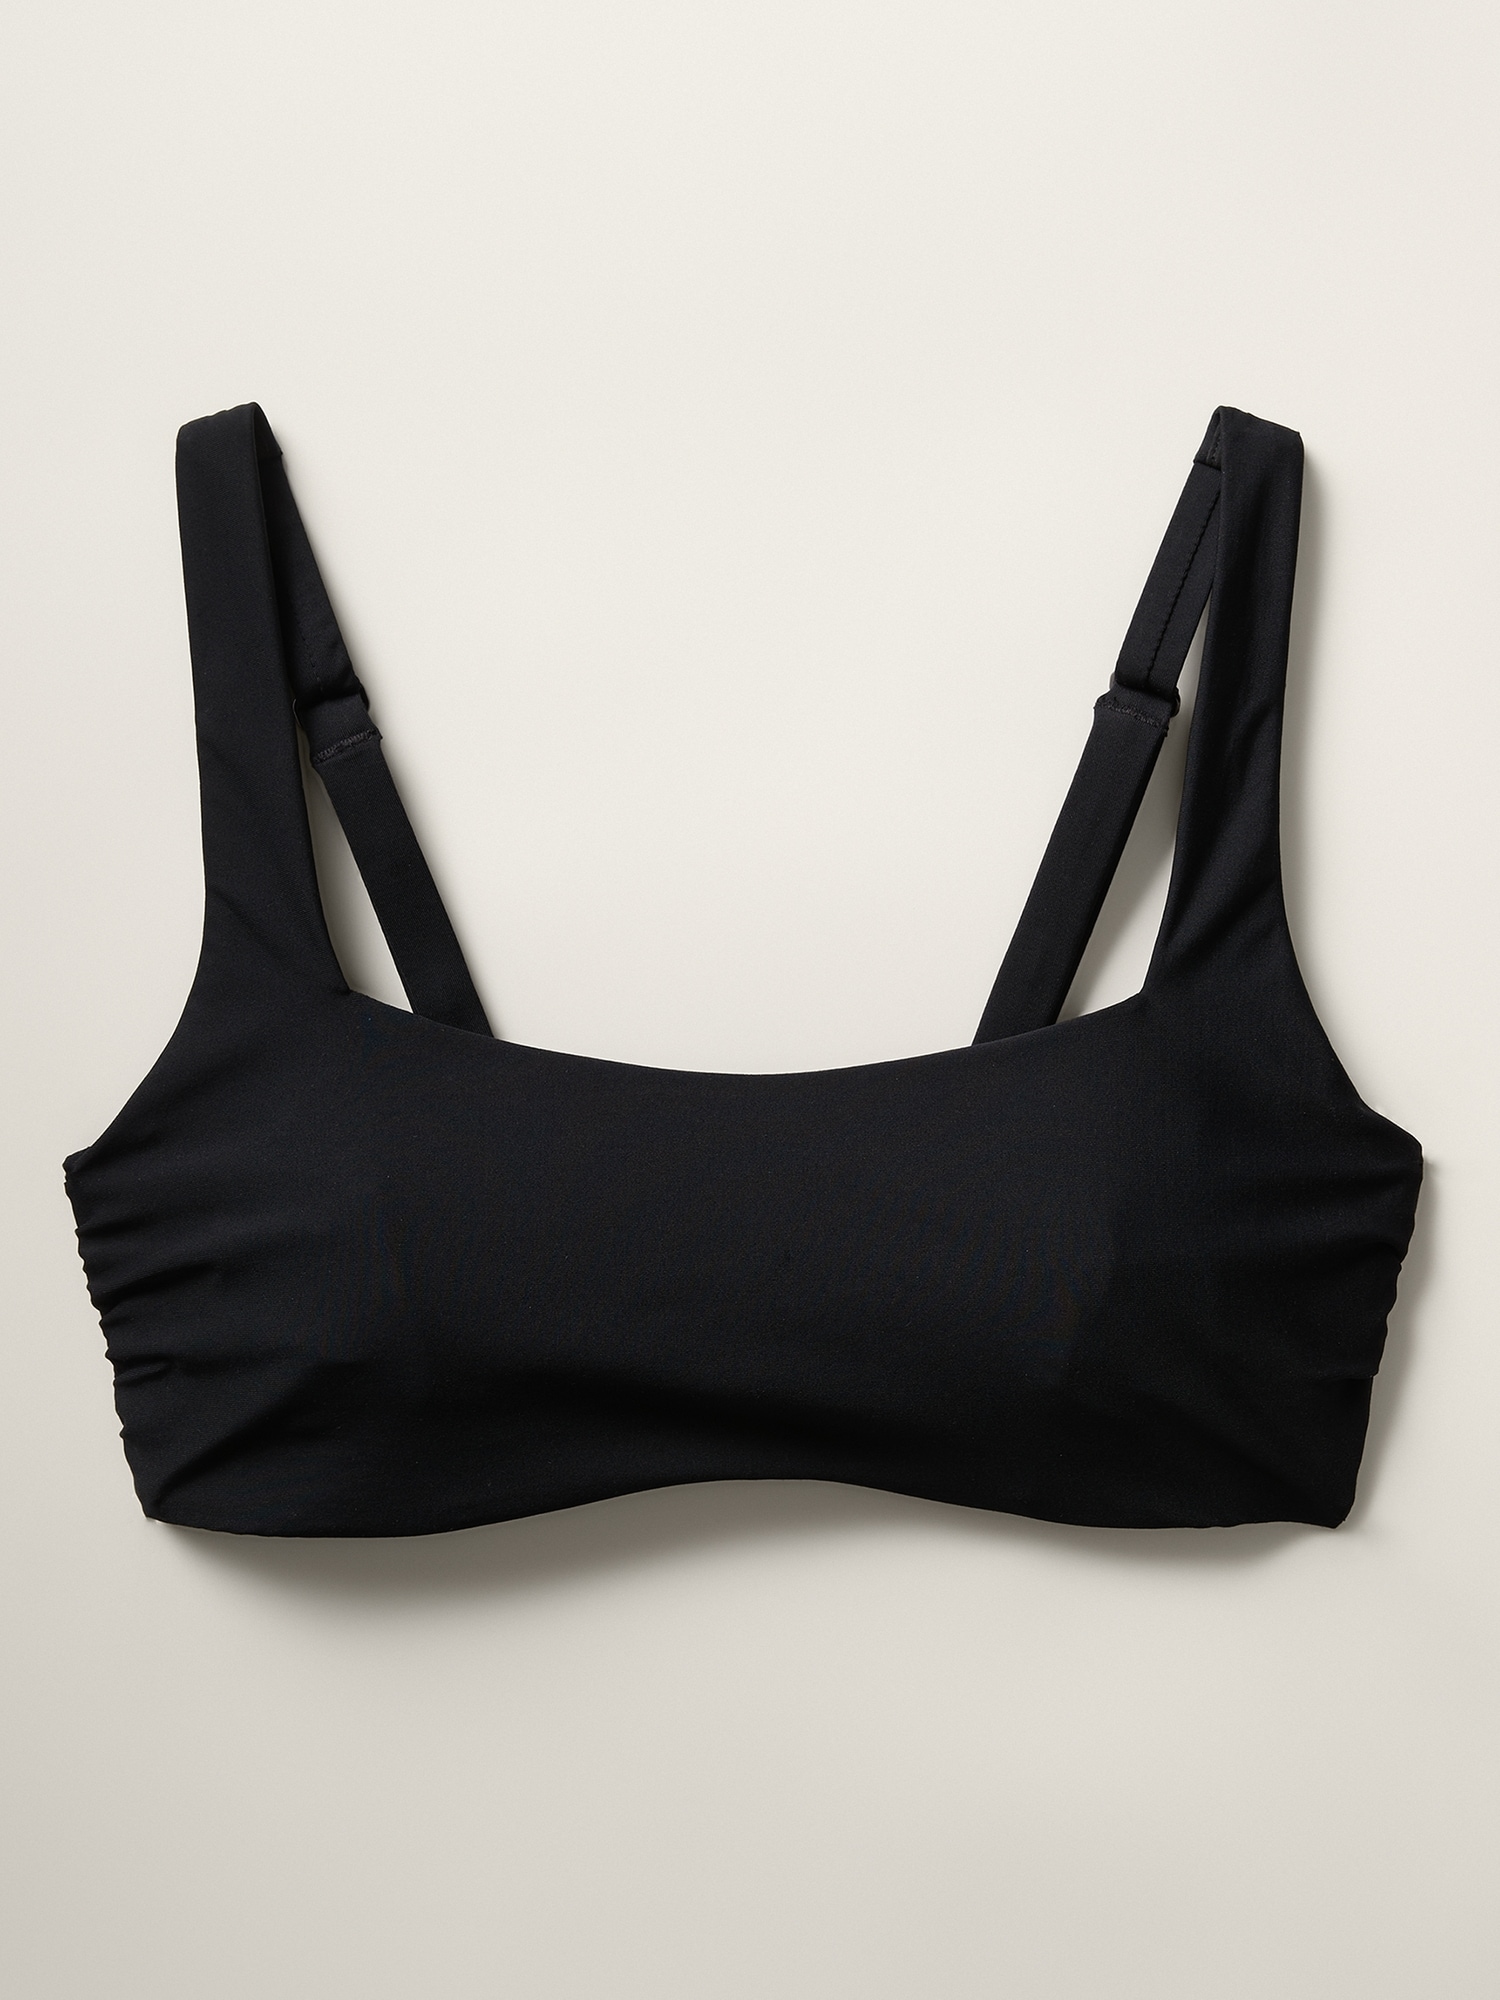 50 Shadows of Grey- Best Sports Bras for Support- Removable Cups for Bras